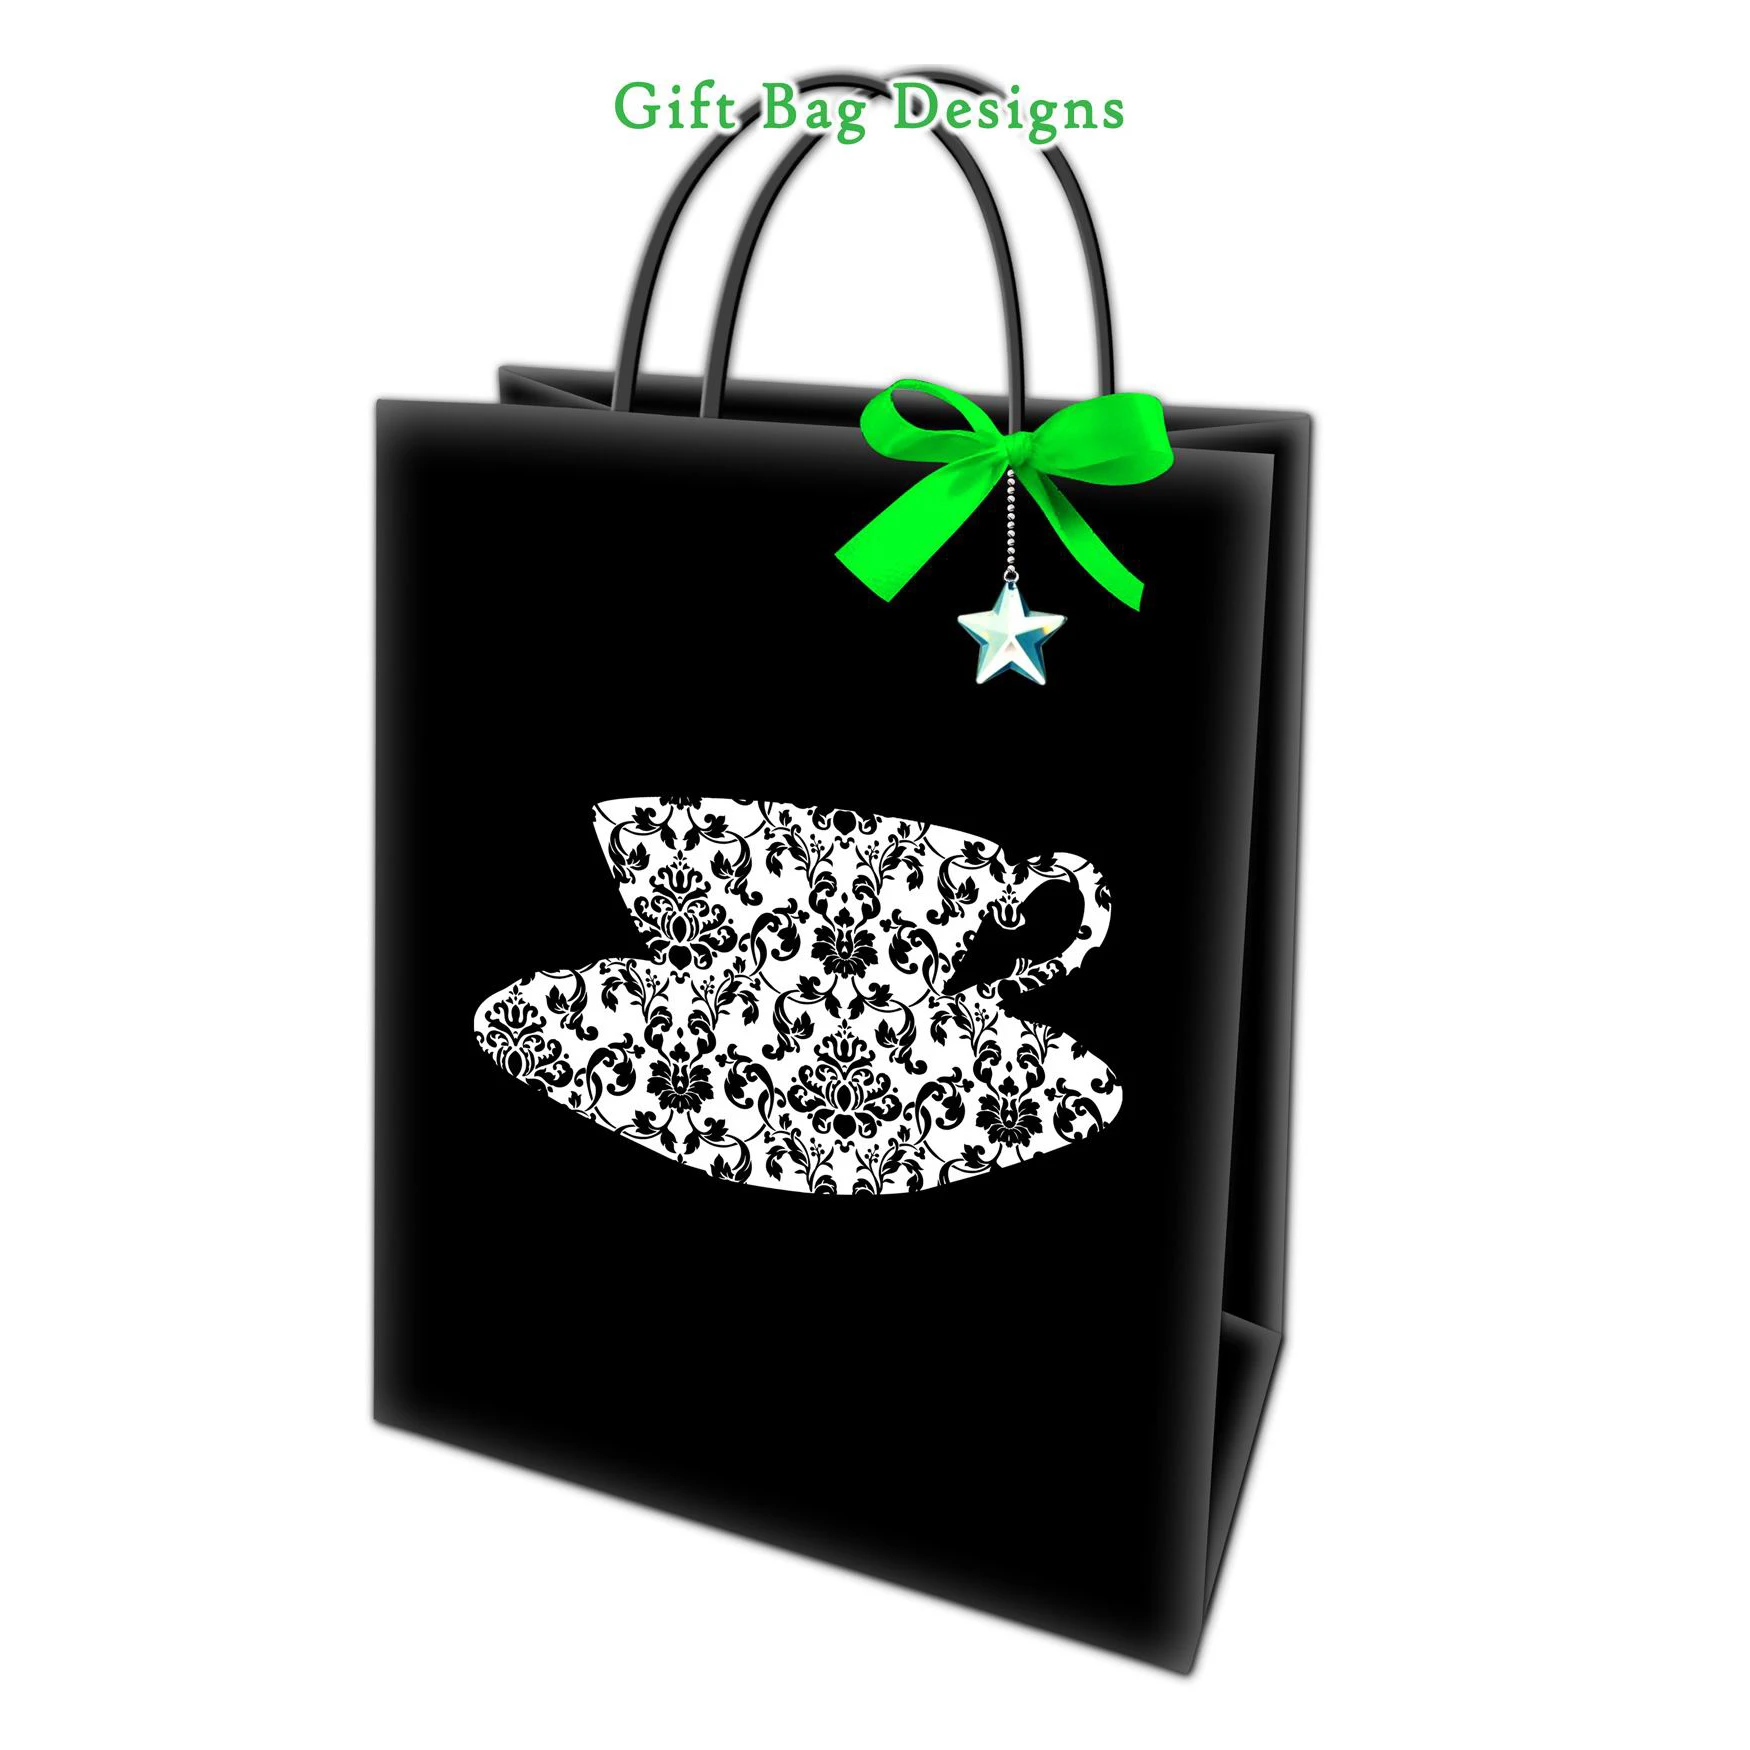 Promotion Retail Bird Pattern Personalities Black Gift Paper Shopping Bags With Green Bowknot